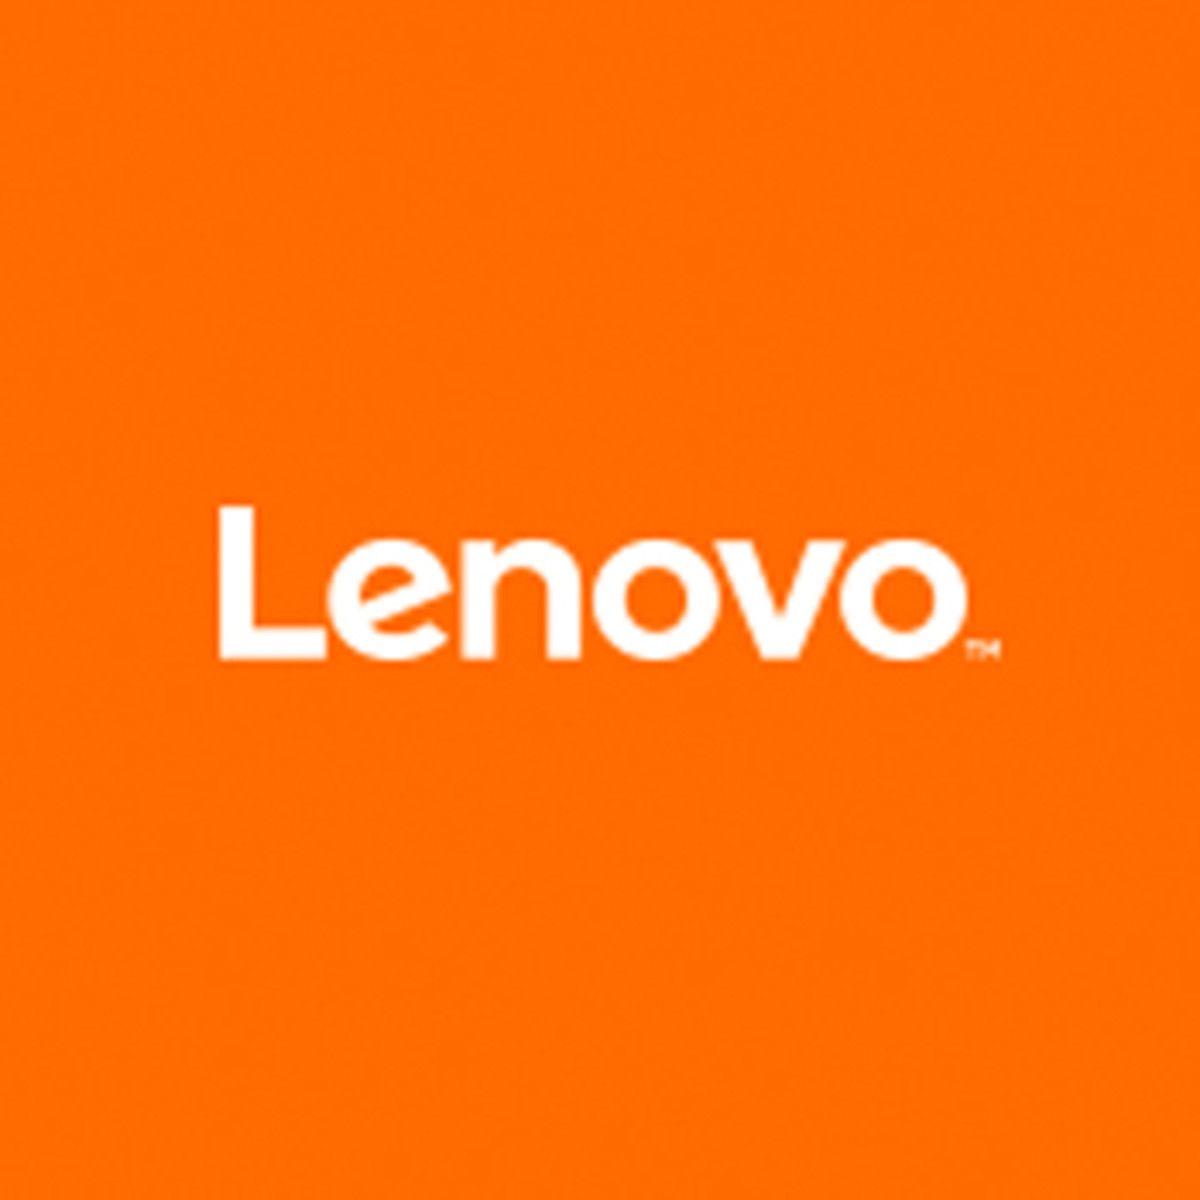 New Lenovo Logo - Lenovo's new look, Smart Shoes and robot research - we look back on ...